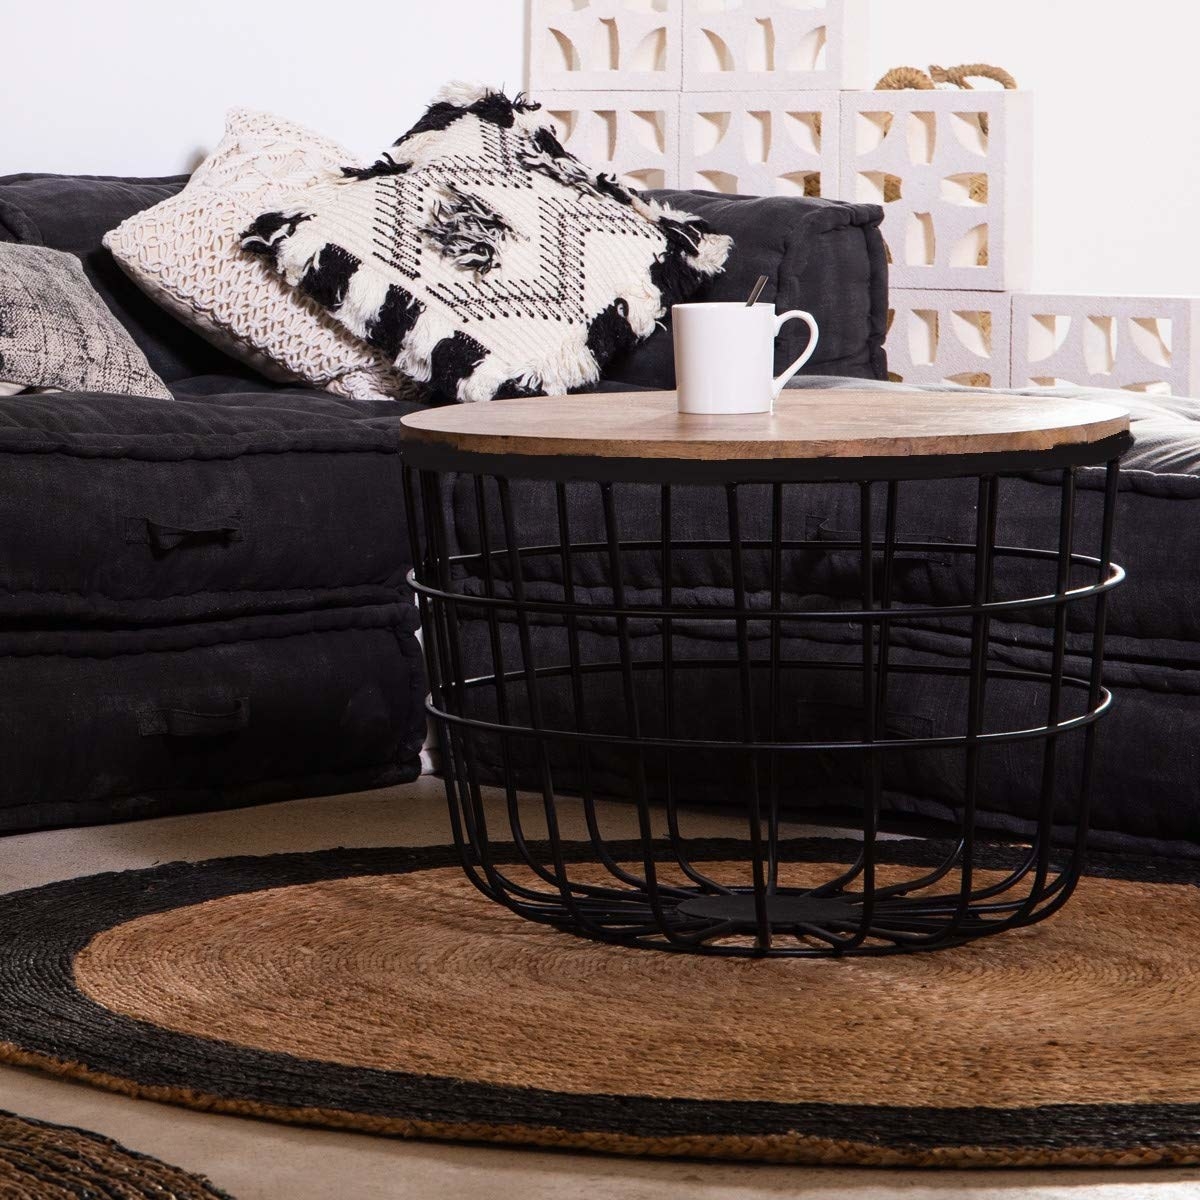 A coffee table with a coffee cup in front of a sofa